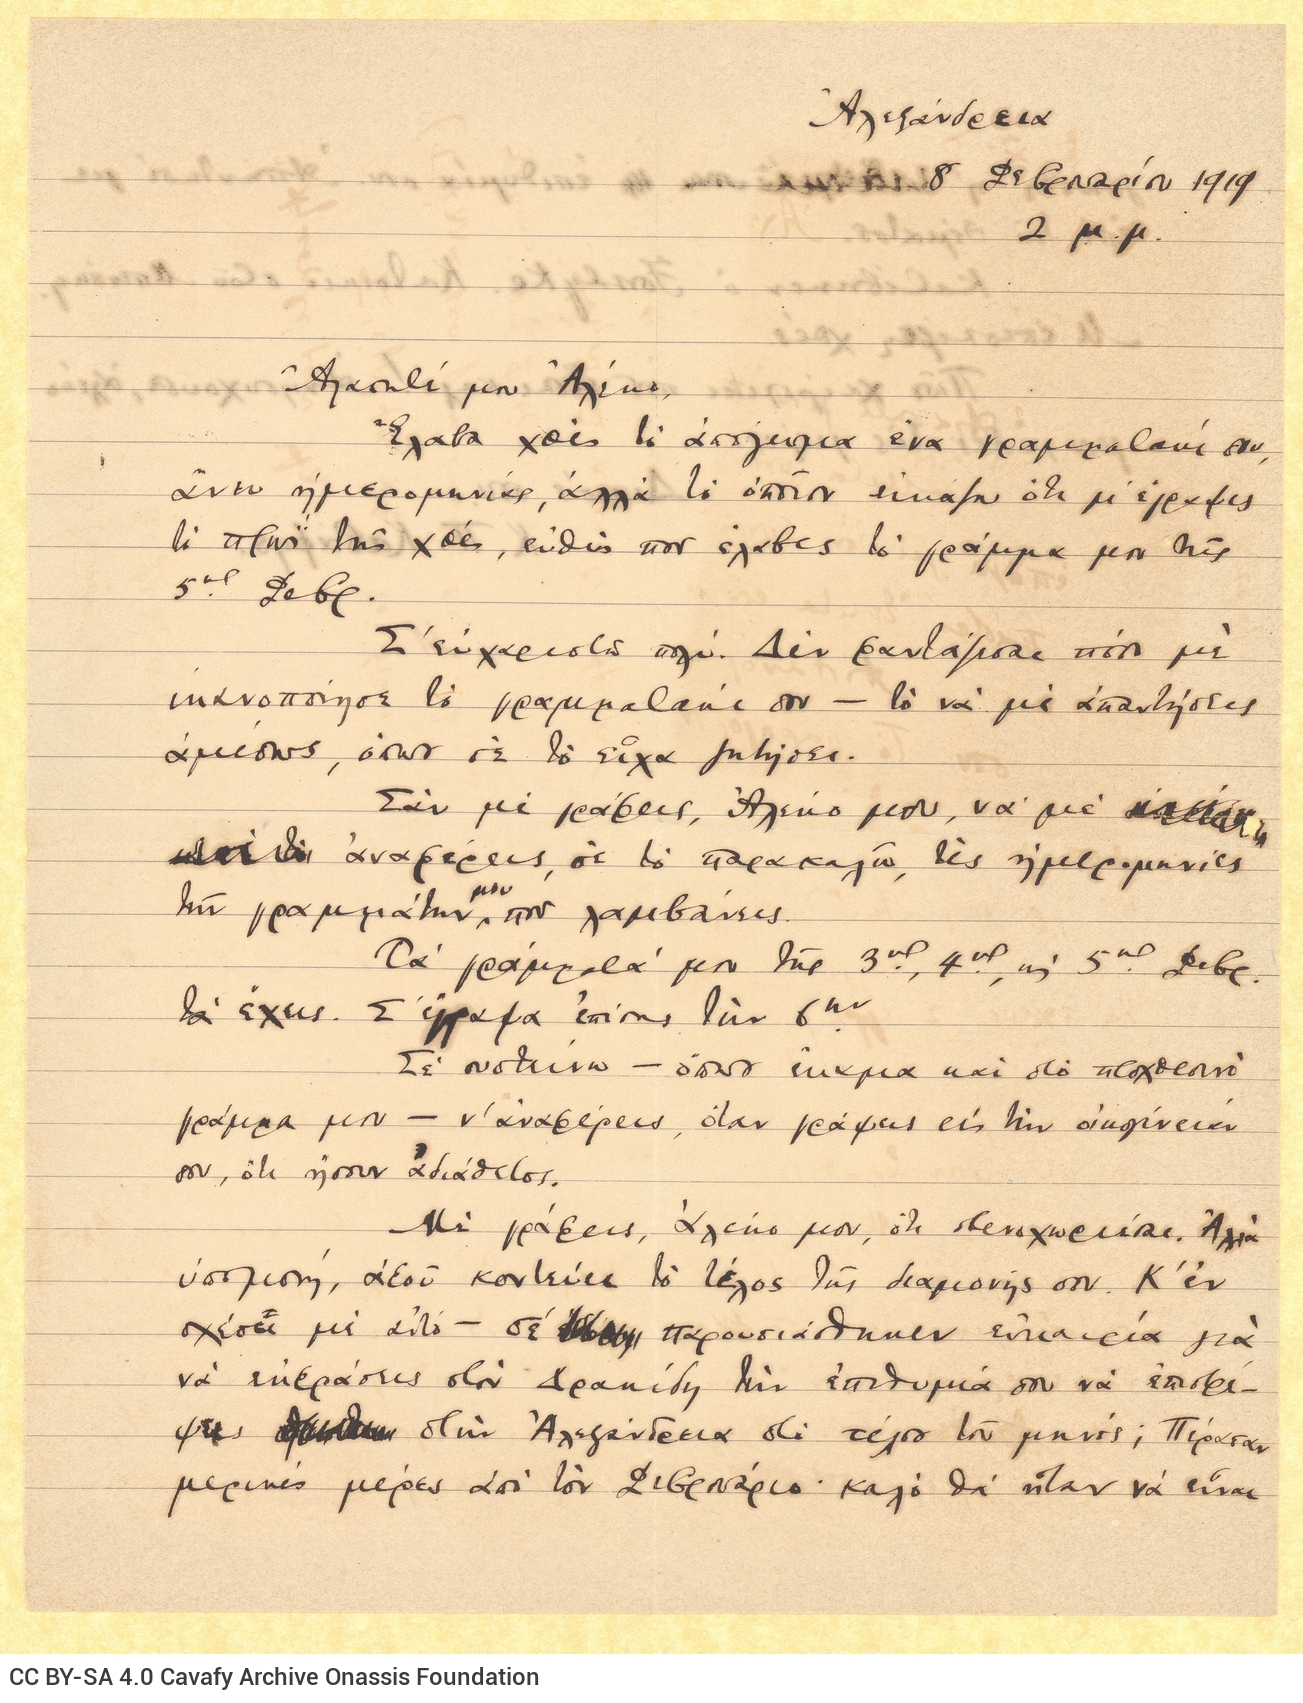 Handwritten letter by Cavafy to Alekos [Singopoulo] on both sides of a ruled sheet. Plans for Singopoulo's return to Alexa